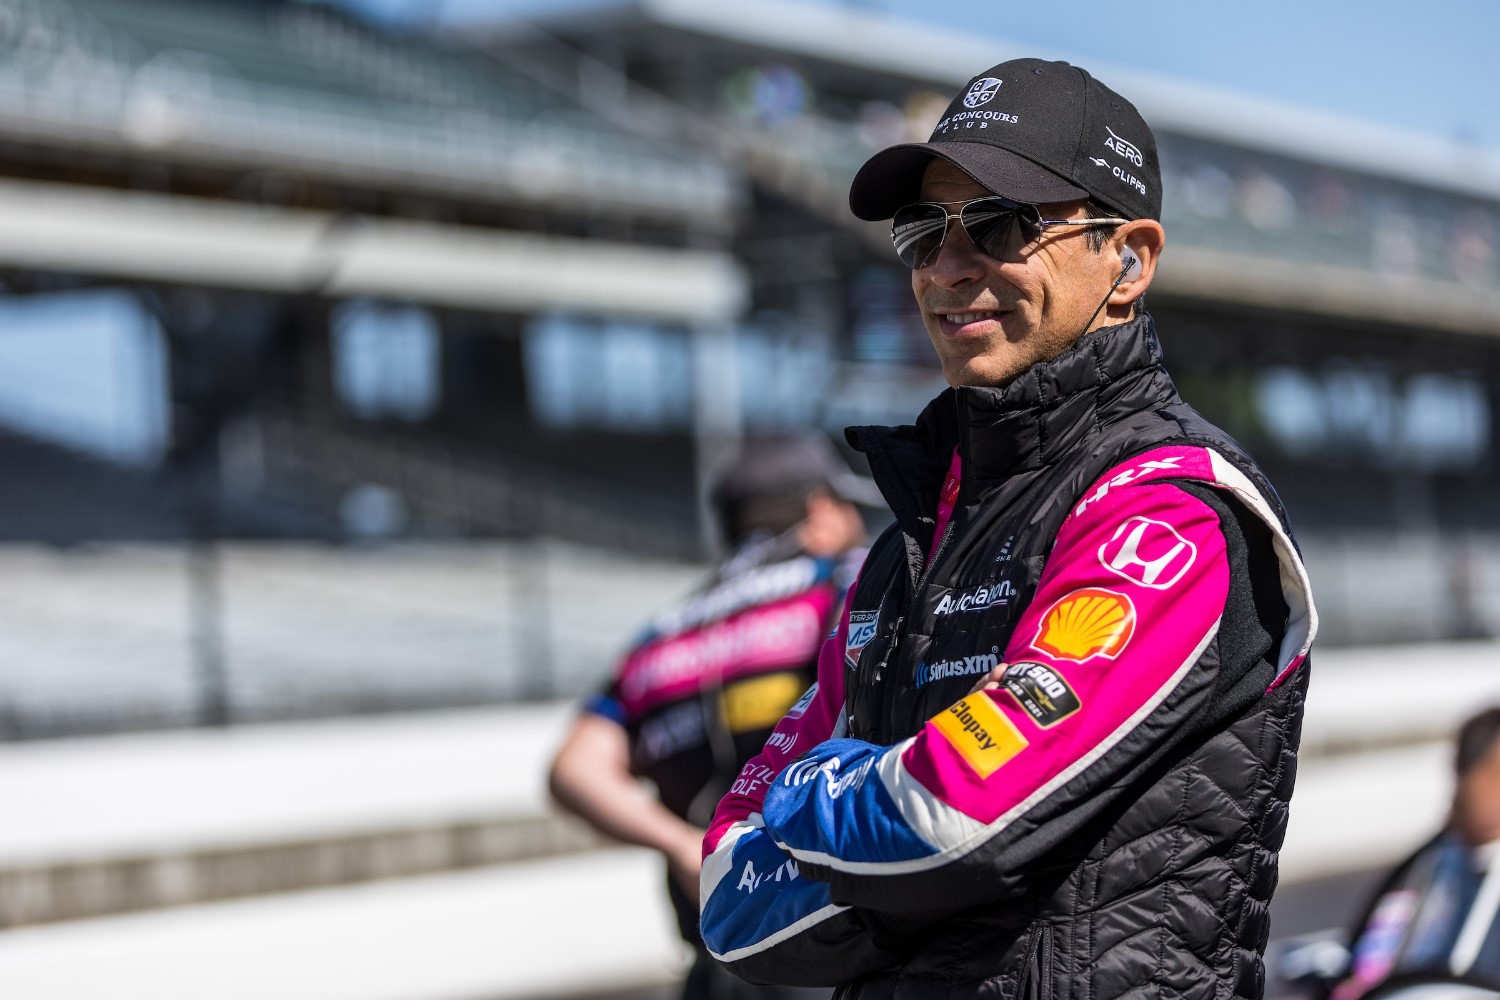 Helio Castroneves becomes a minority team owner